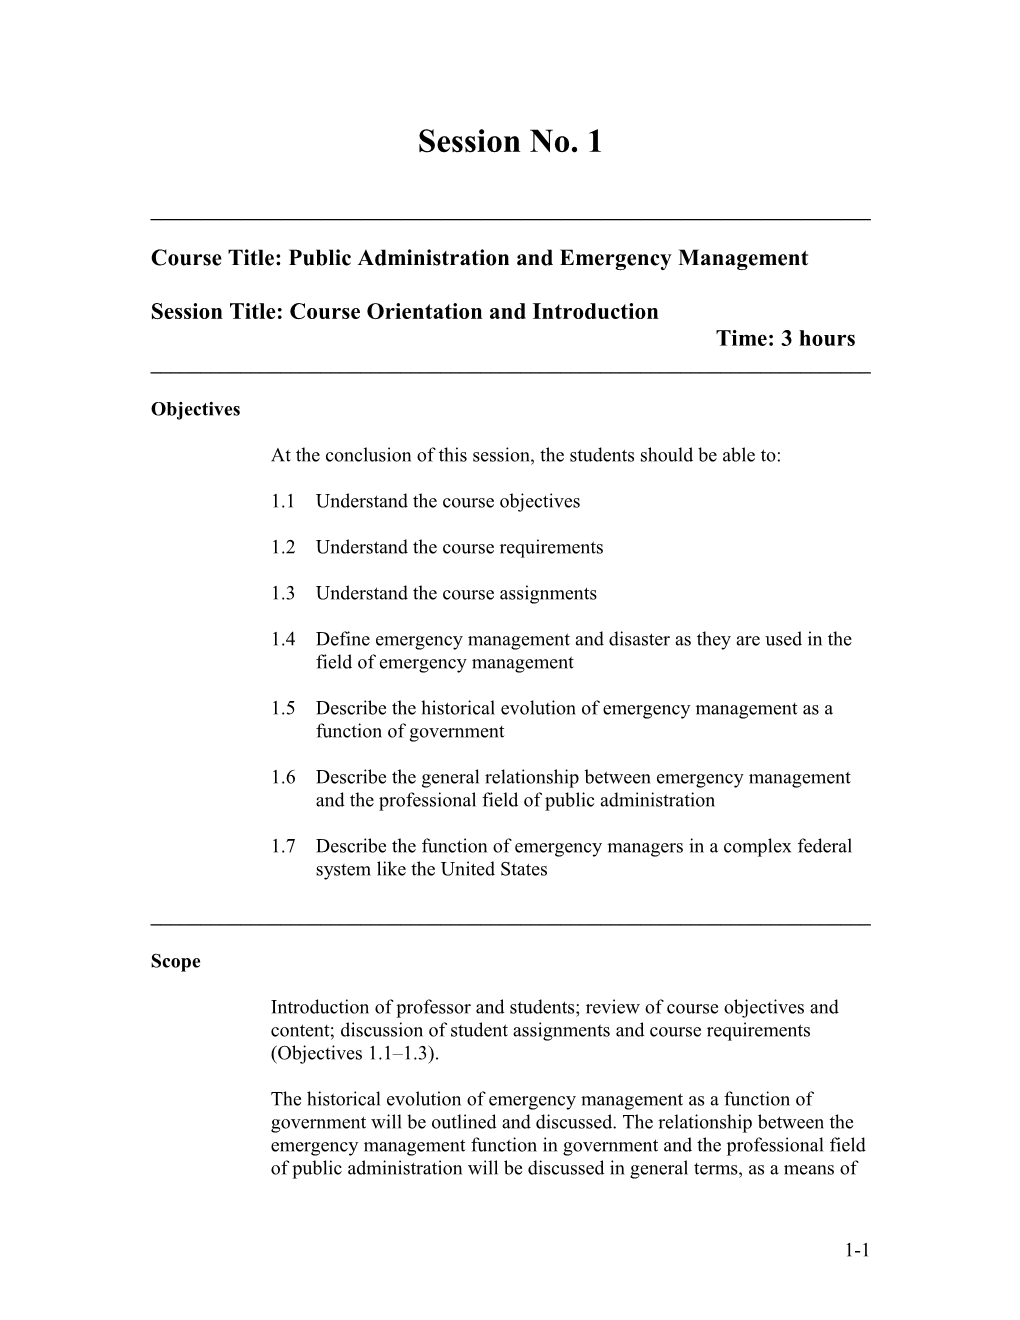 Course Title: Public Administration and Emergency Management